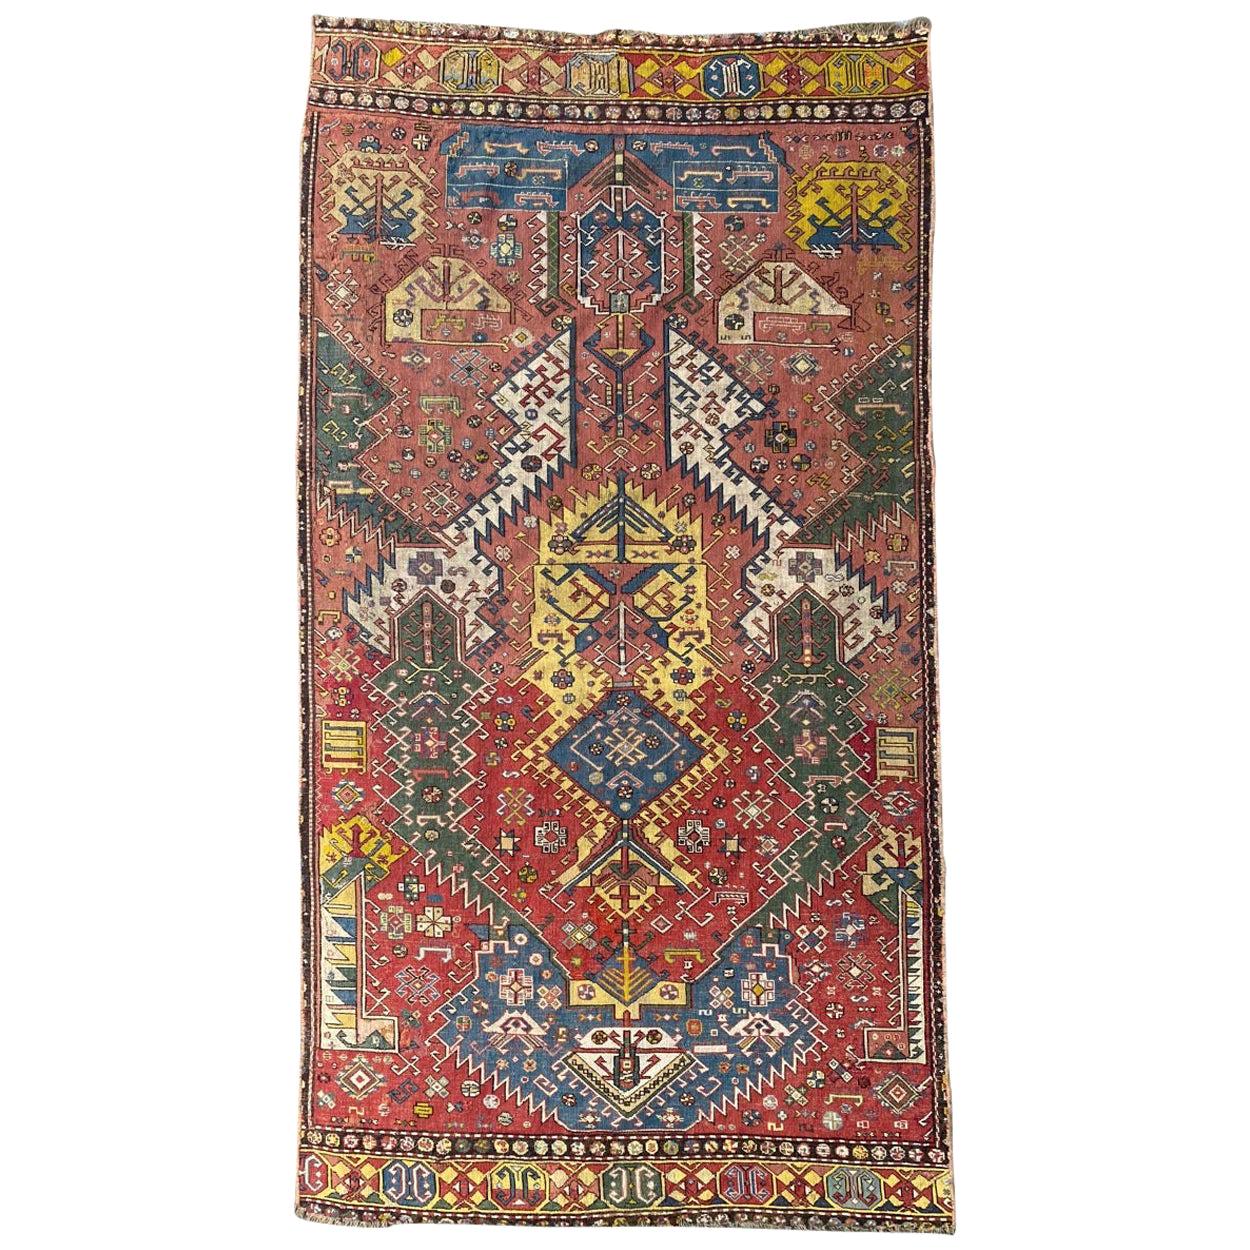 Bobyrug’s Extraordinary Unusual Antique Caucasian Needlepoint Embroidered Rug